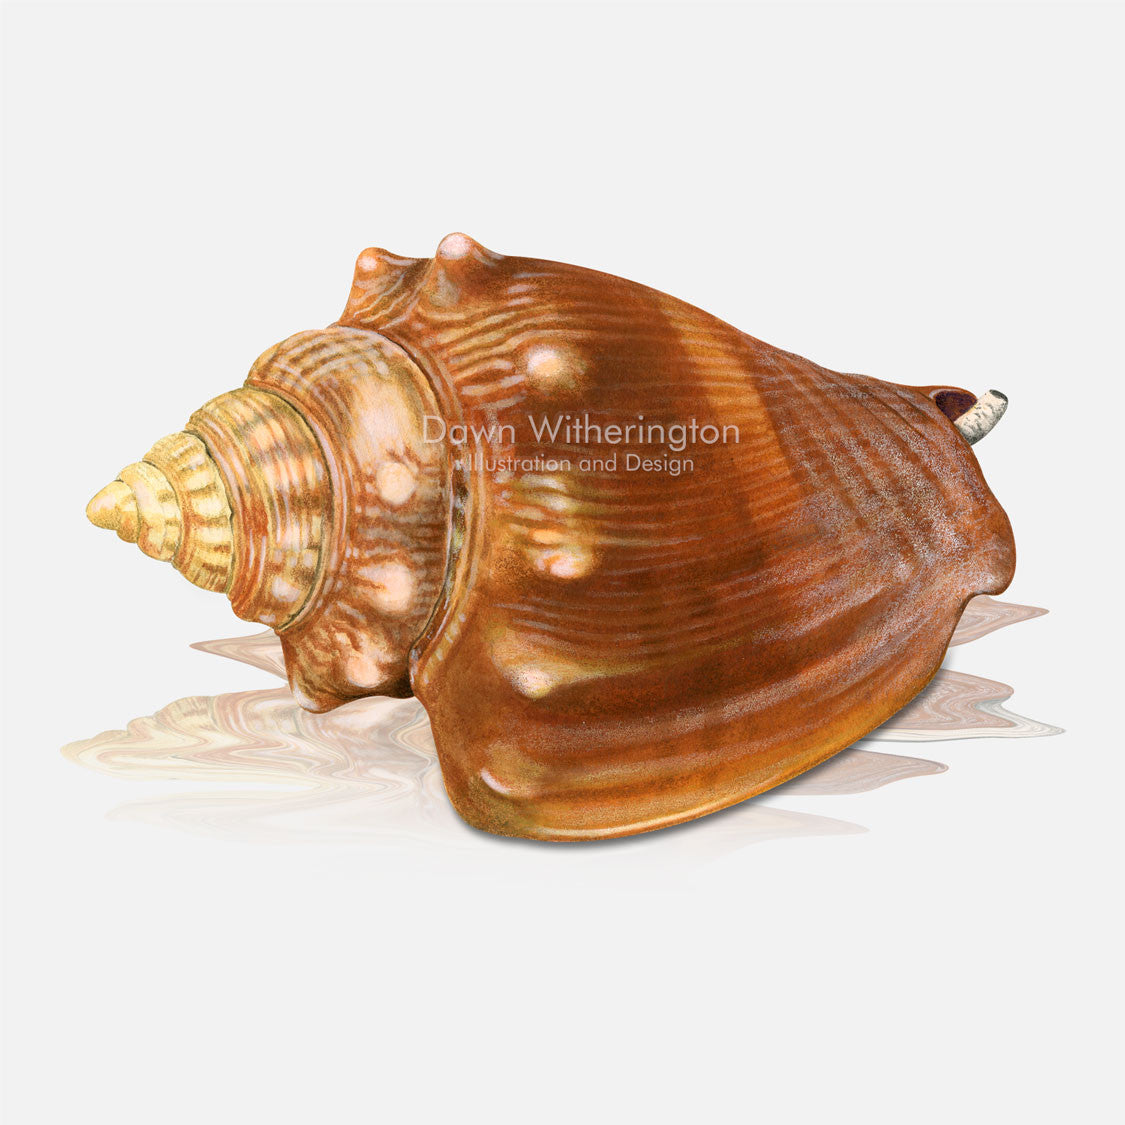 This beautiful drawing of a Florida fighting conch, Strombus alatus, is biologically accurate in detail.